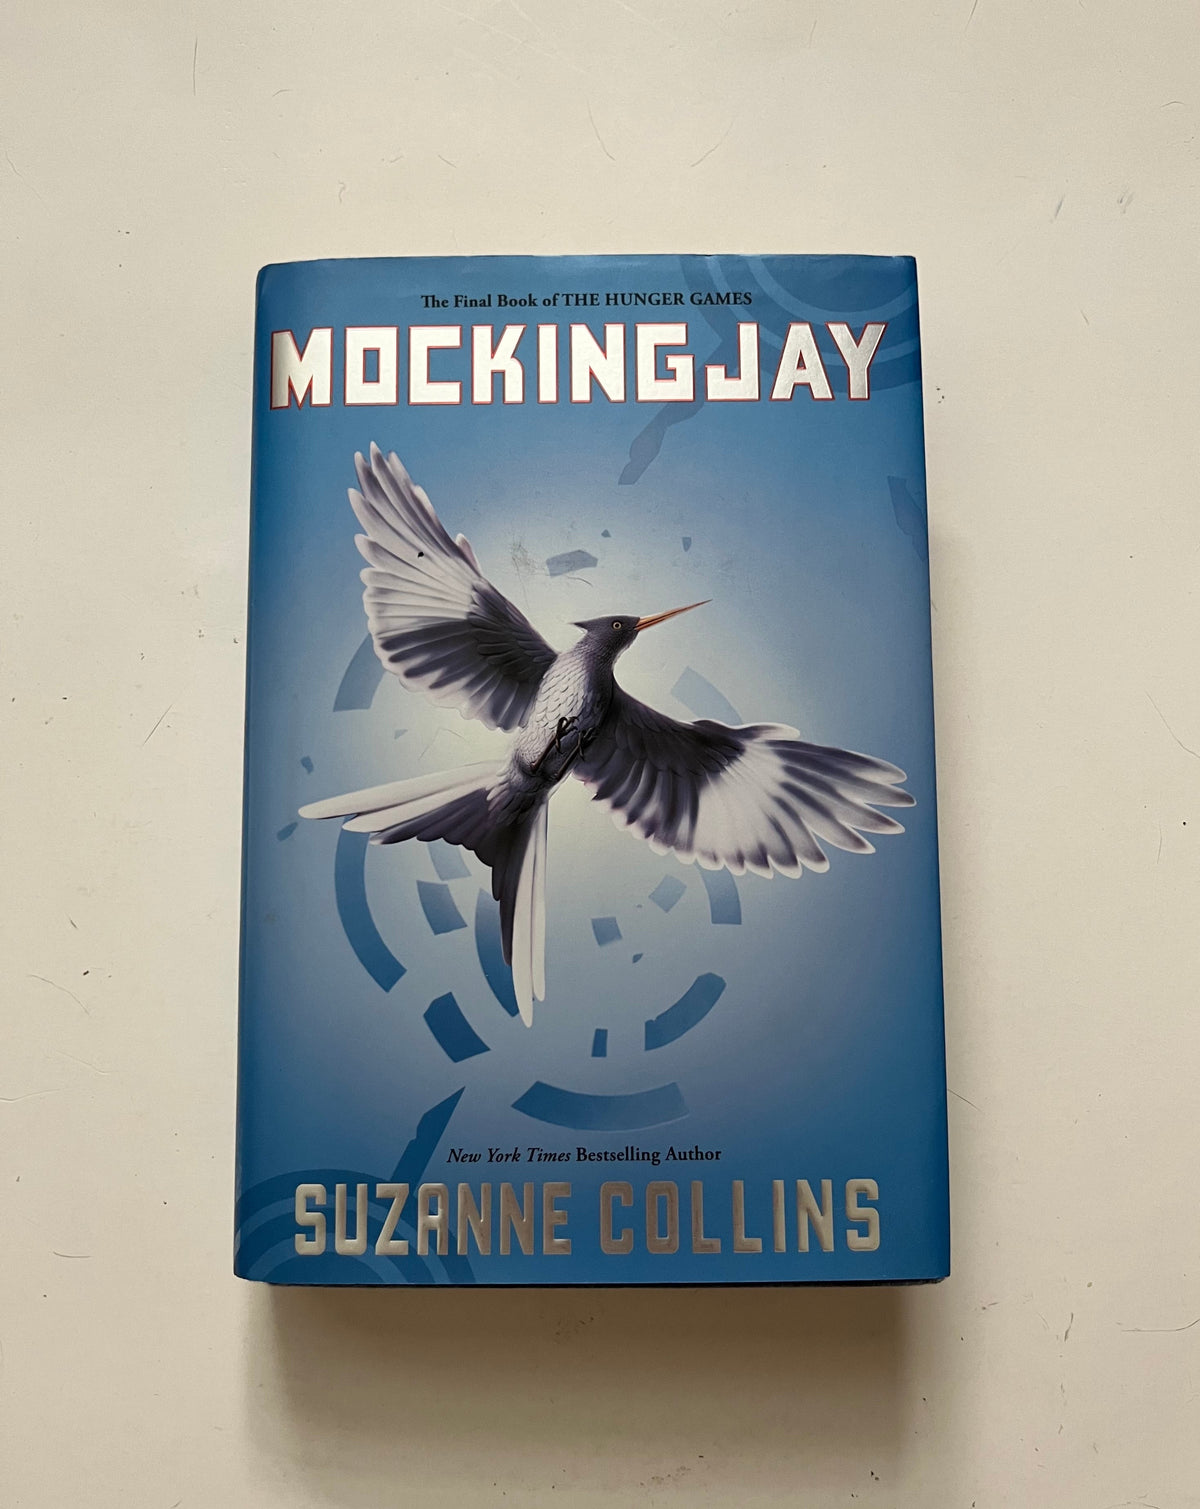 Mocking Jay by Suzanne Collins